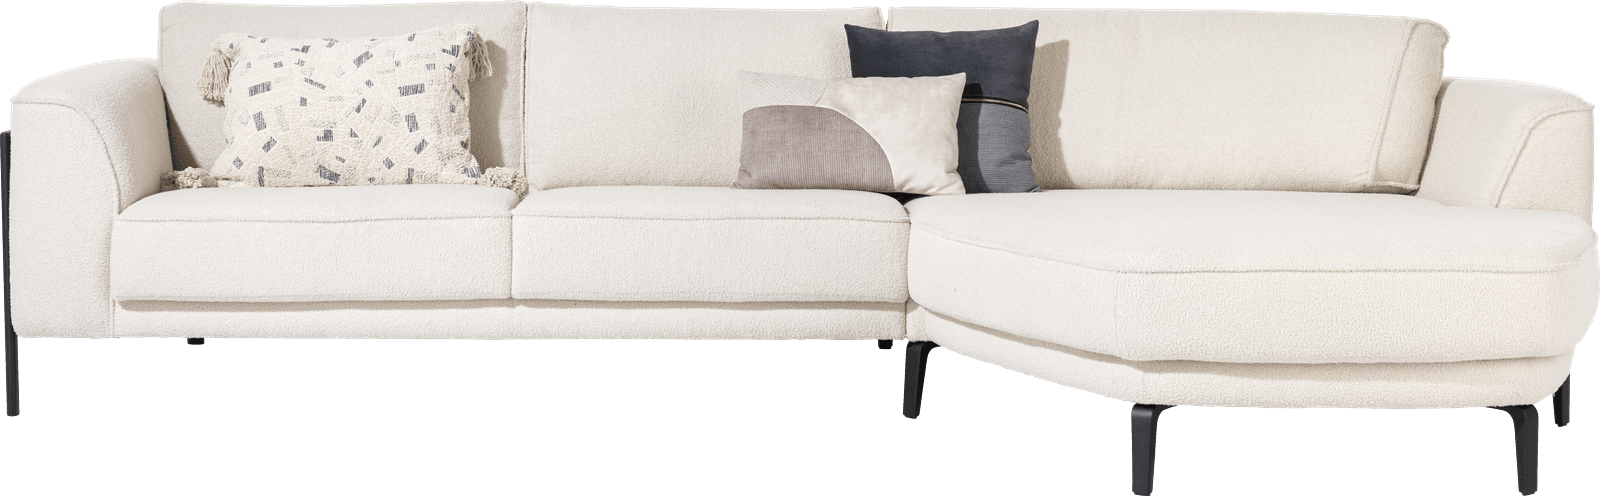 Henders and Hazel - Langley - Sofas - Longchair curved rechts - 2,5 Sitzer Armlehne links